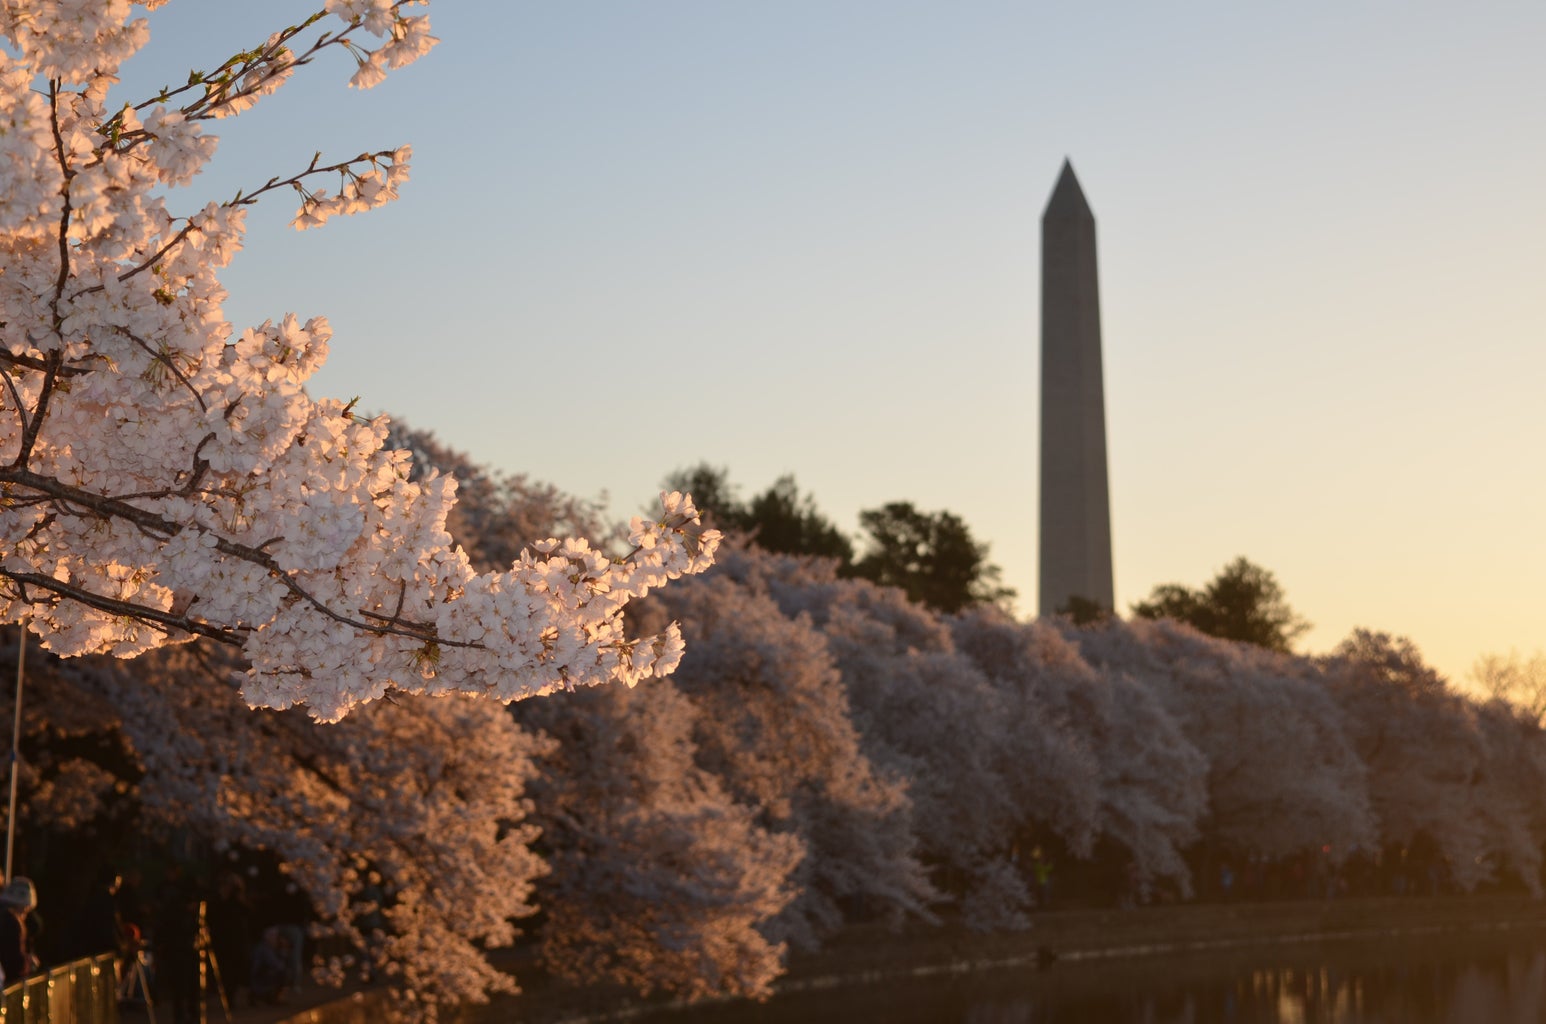 cherry blossom trees with the Washington Monument in the background